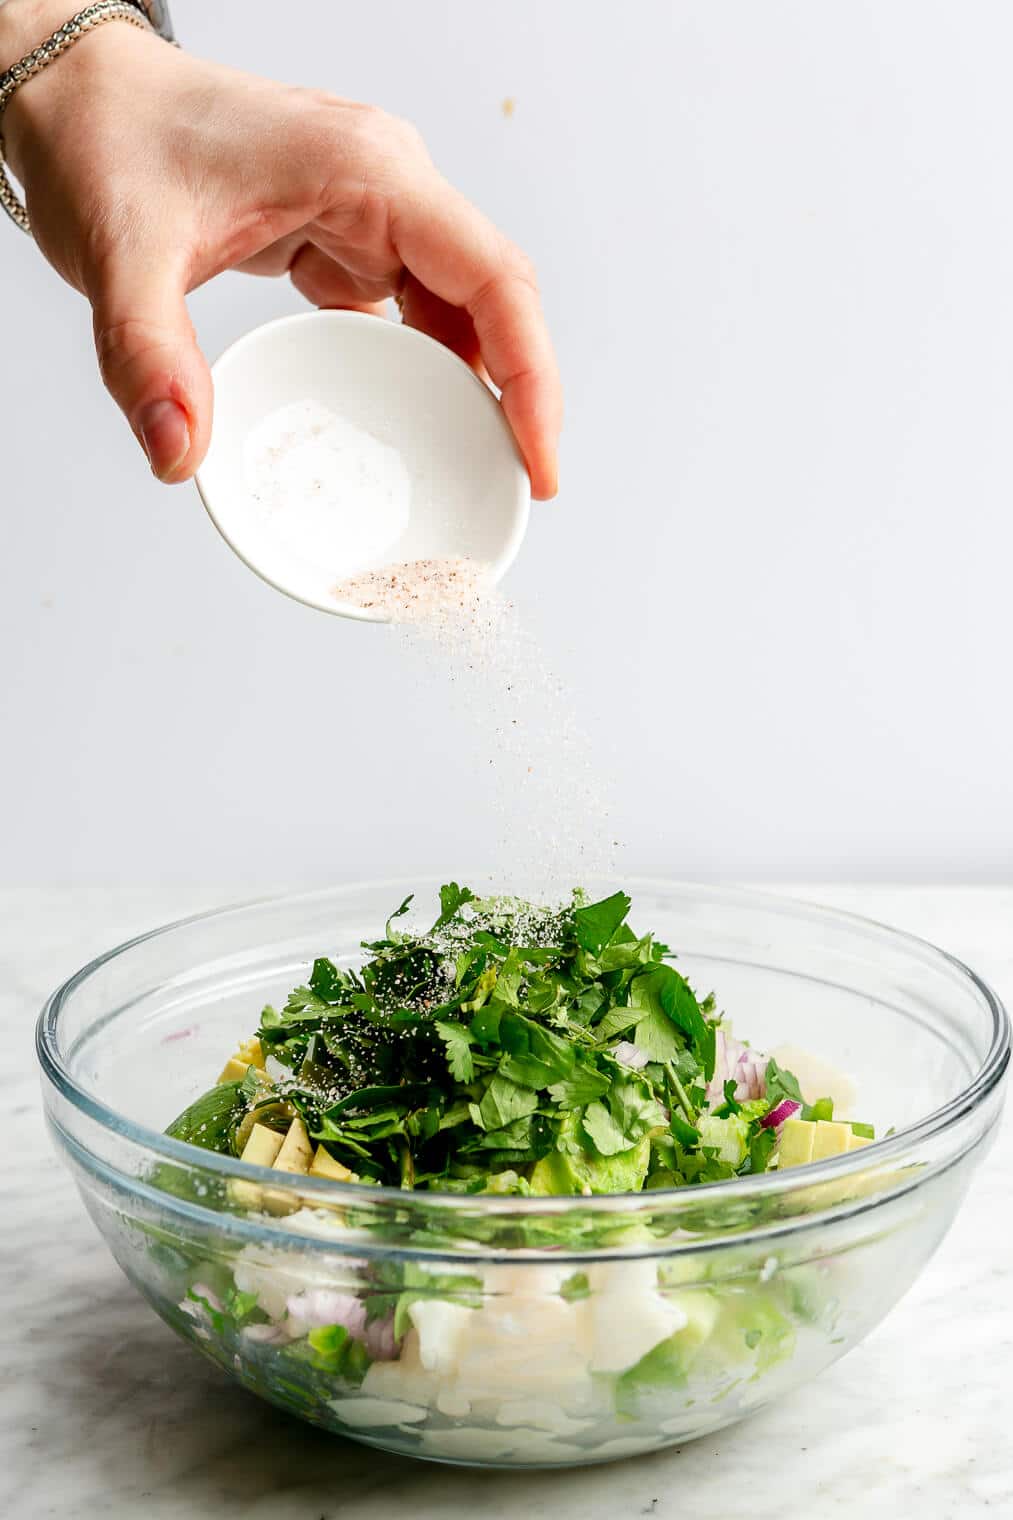 Hand pouring salt over top of cilantro and diced veggies with cubed white fish in a large glass bowl.